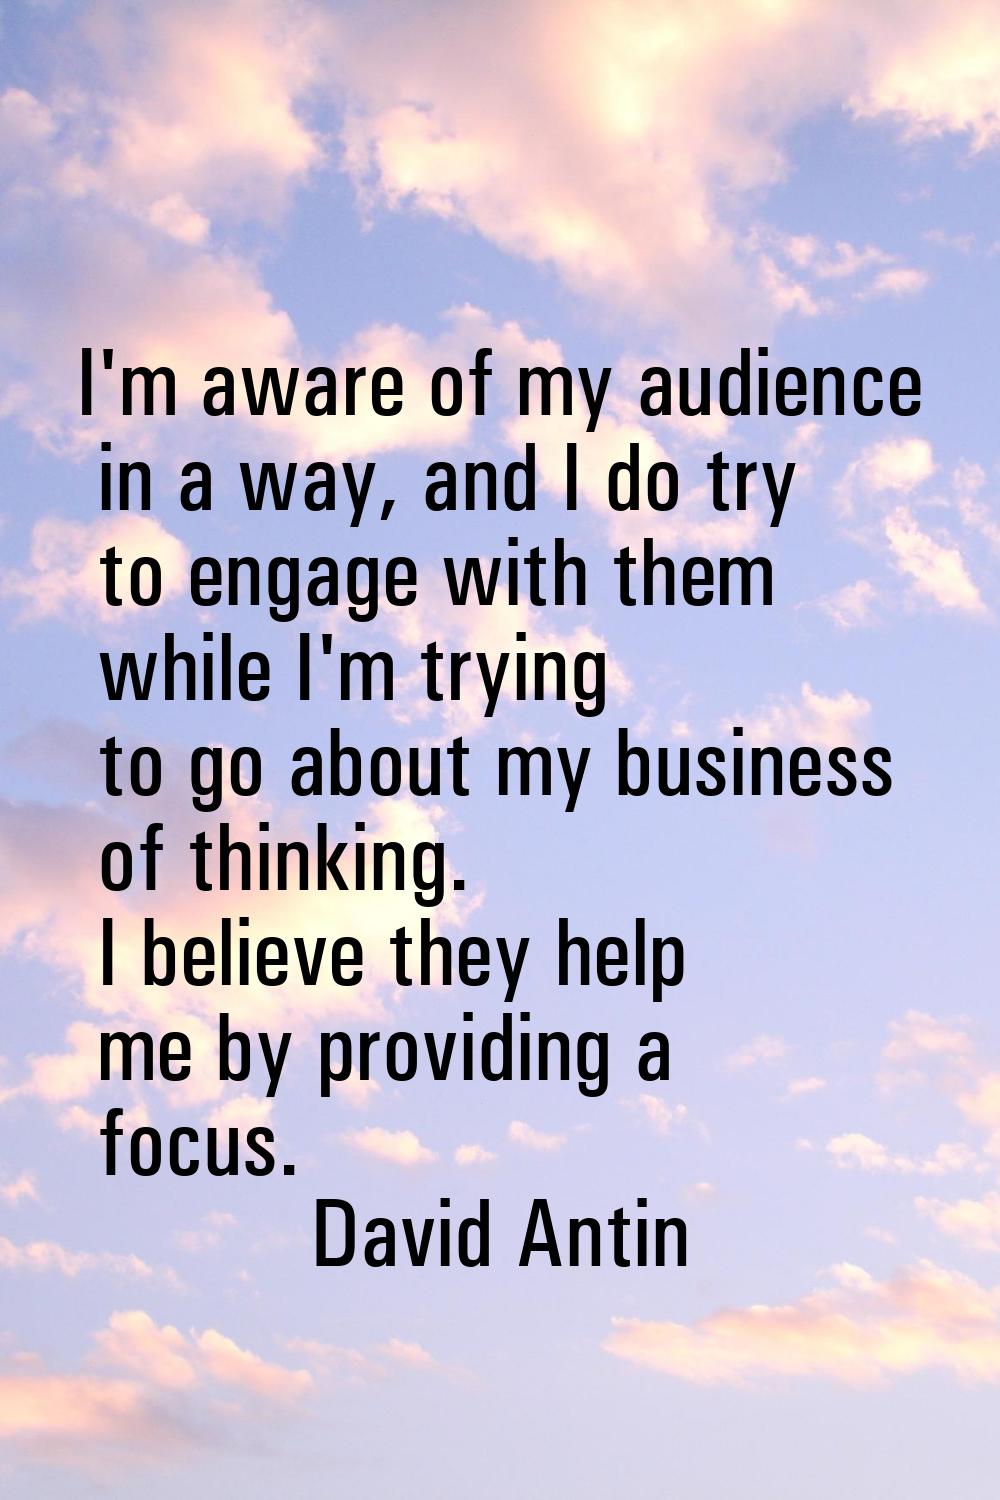 I'm aware of my audience in a way, and I do try to engage with them while I'm trying to go about my